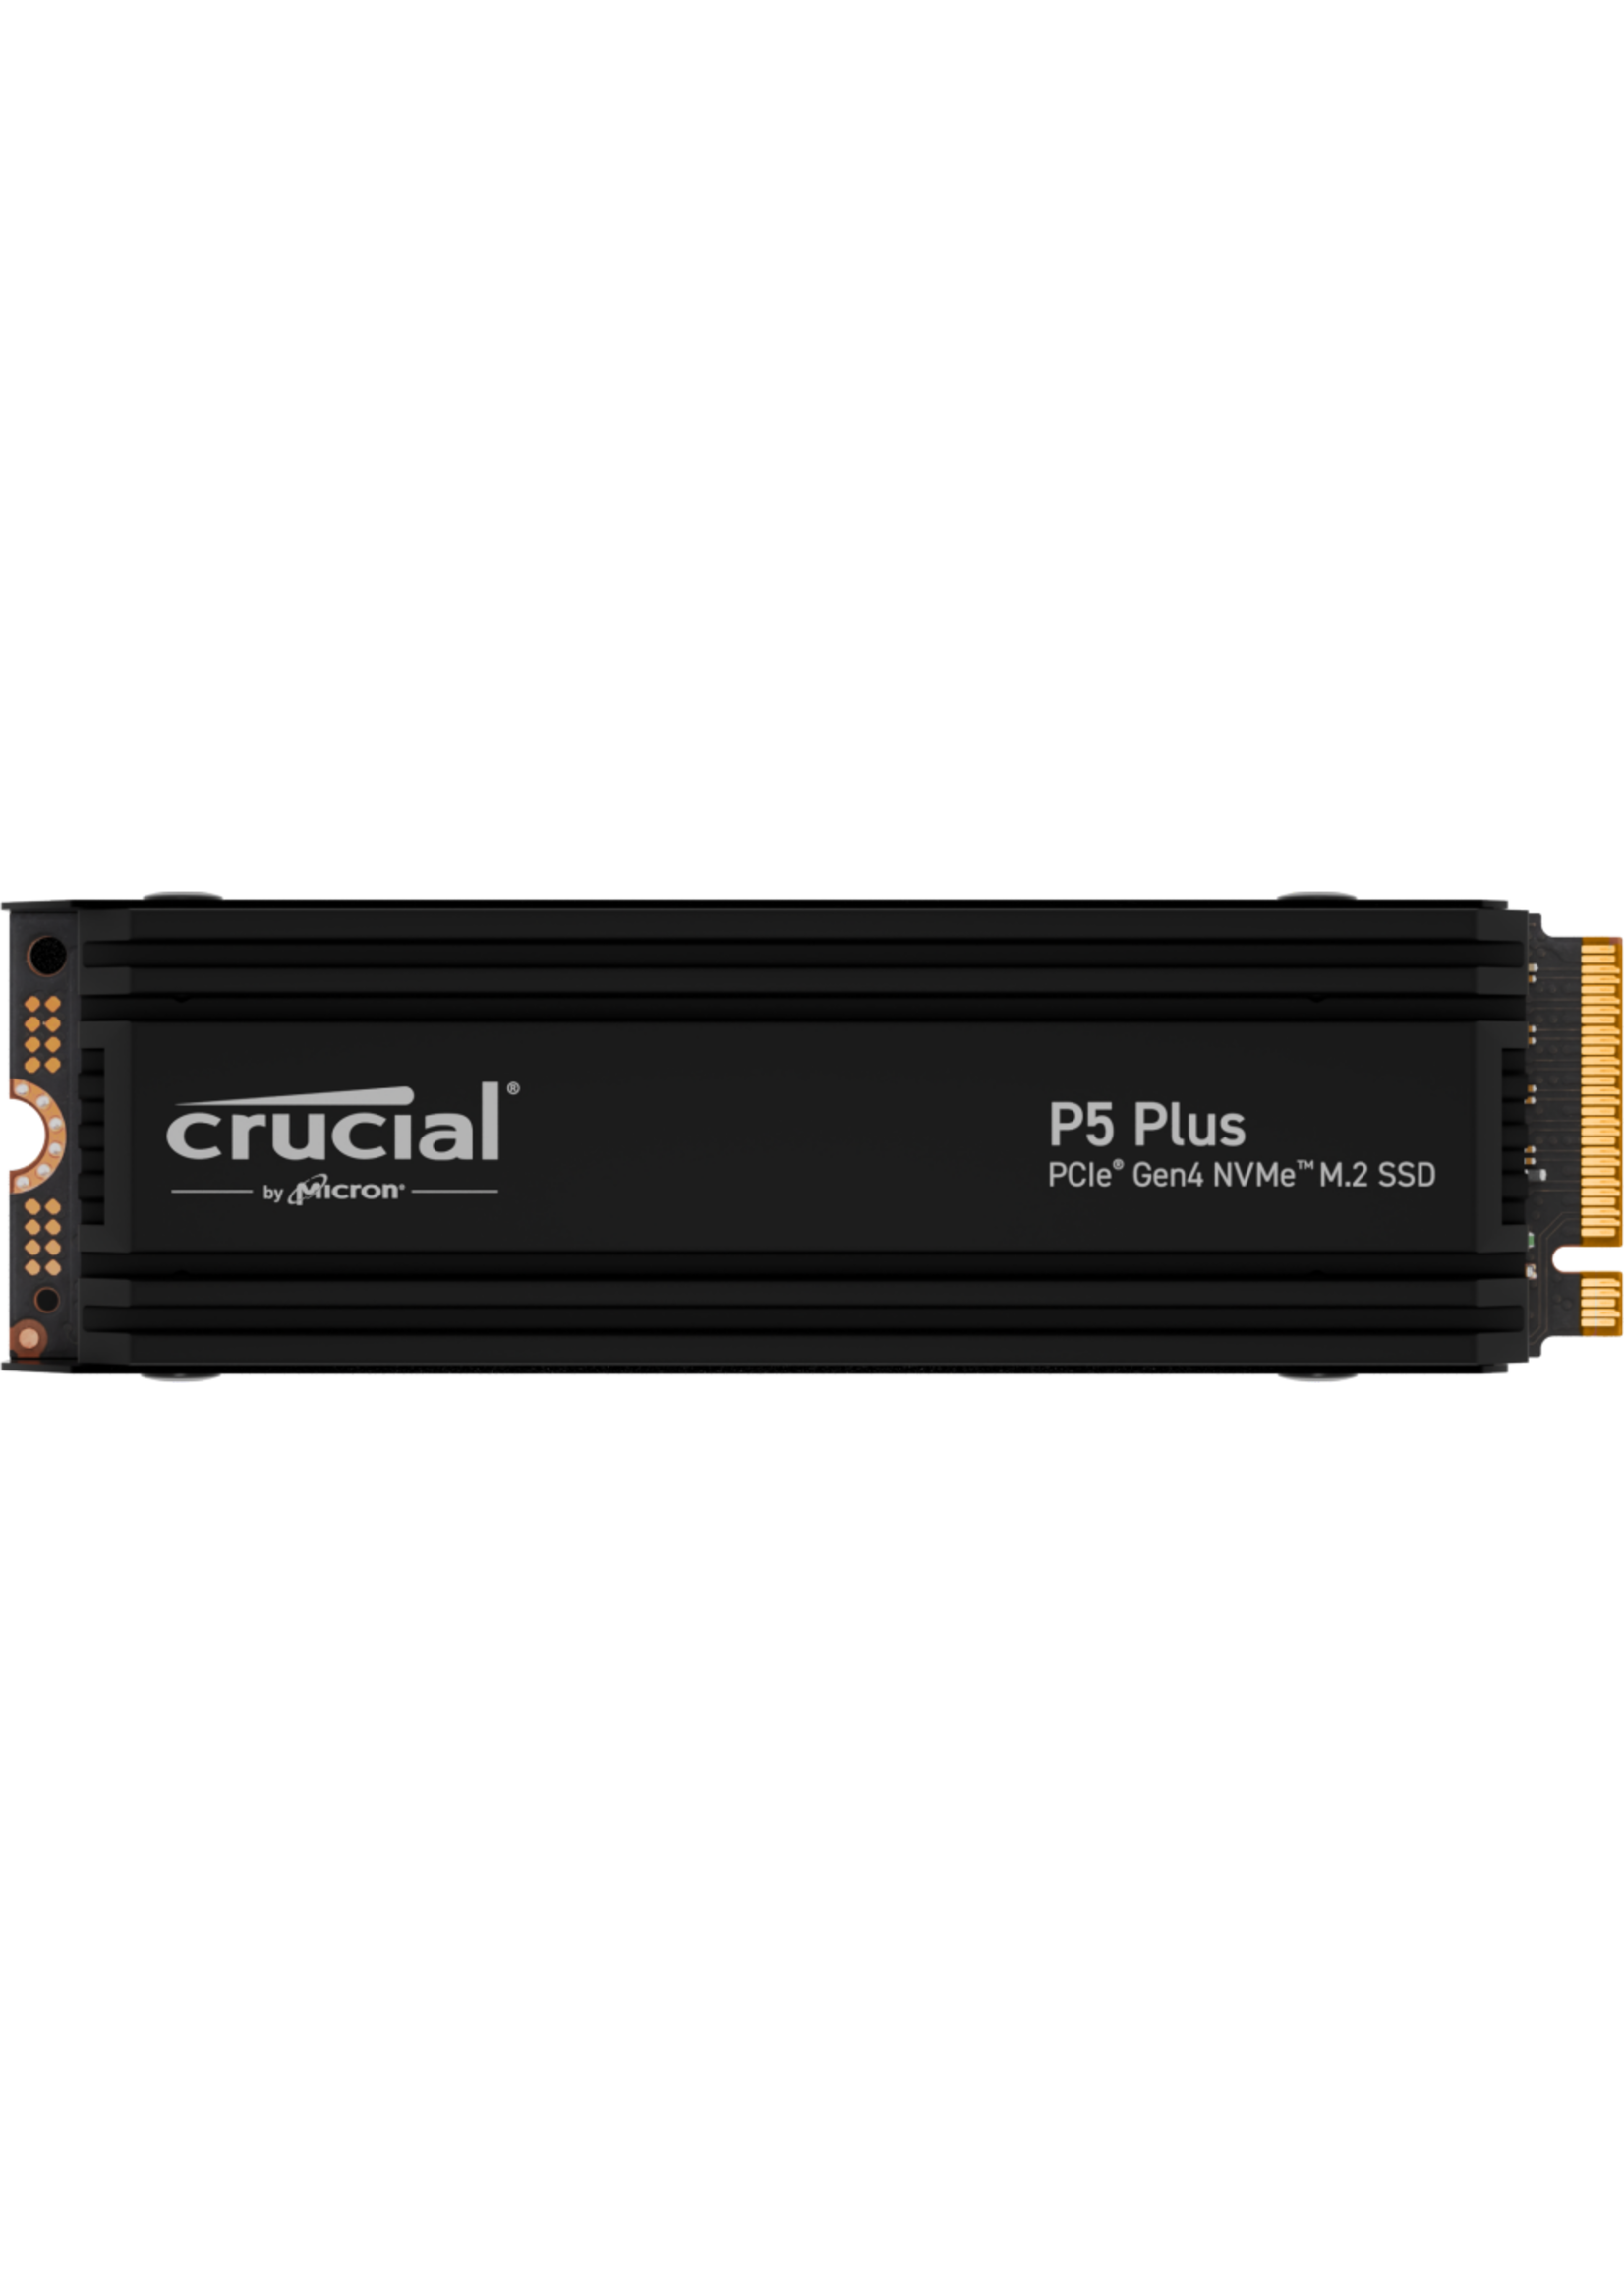 1TB Gen4 NVMe M.2 SSD for PC/PS5